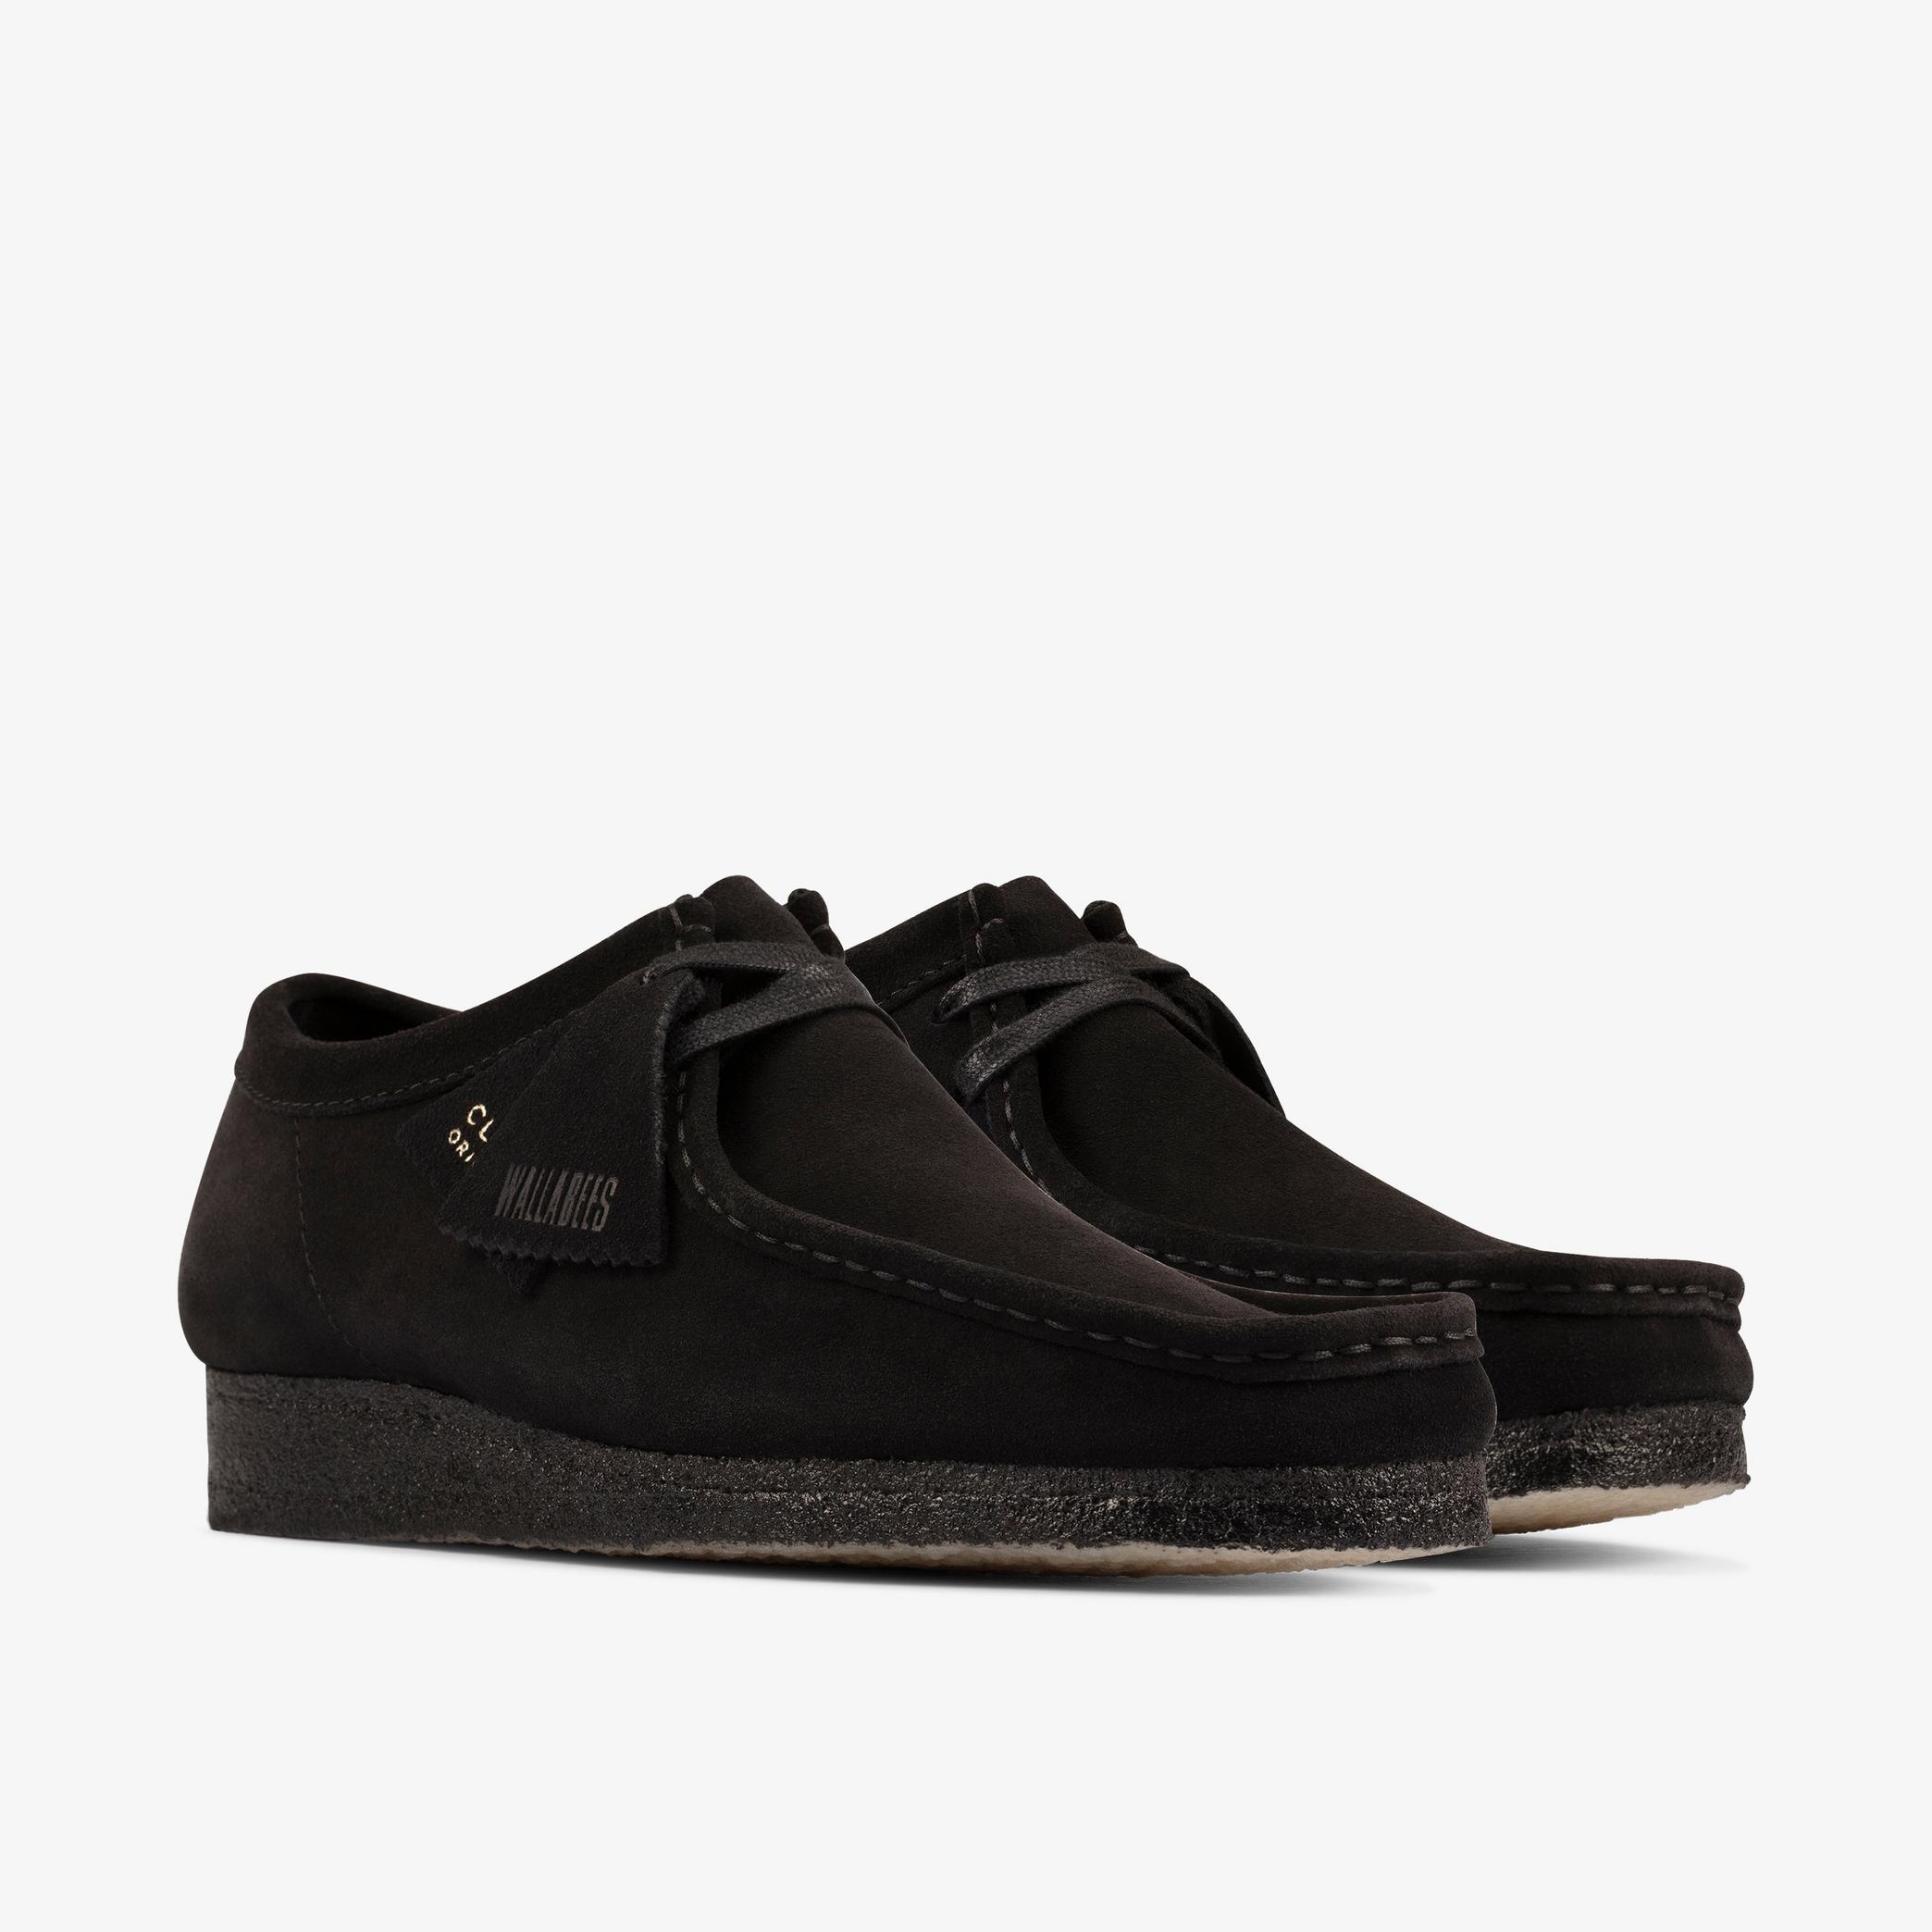 Mens Wallabee Black Suede Shoes | Clarks UK